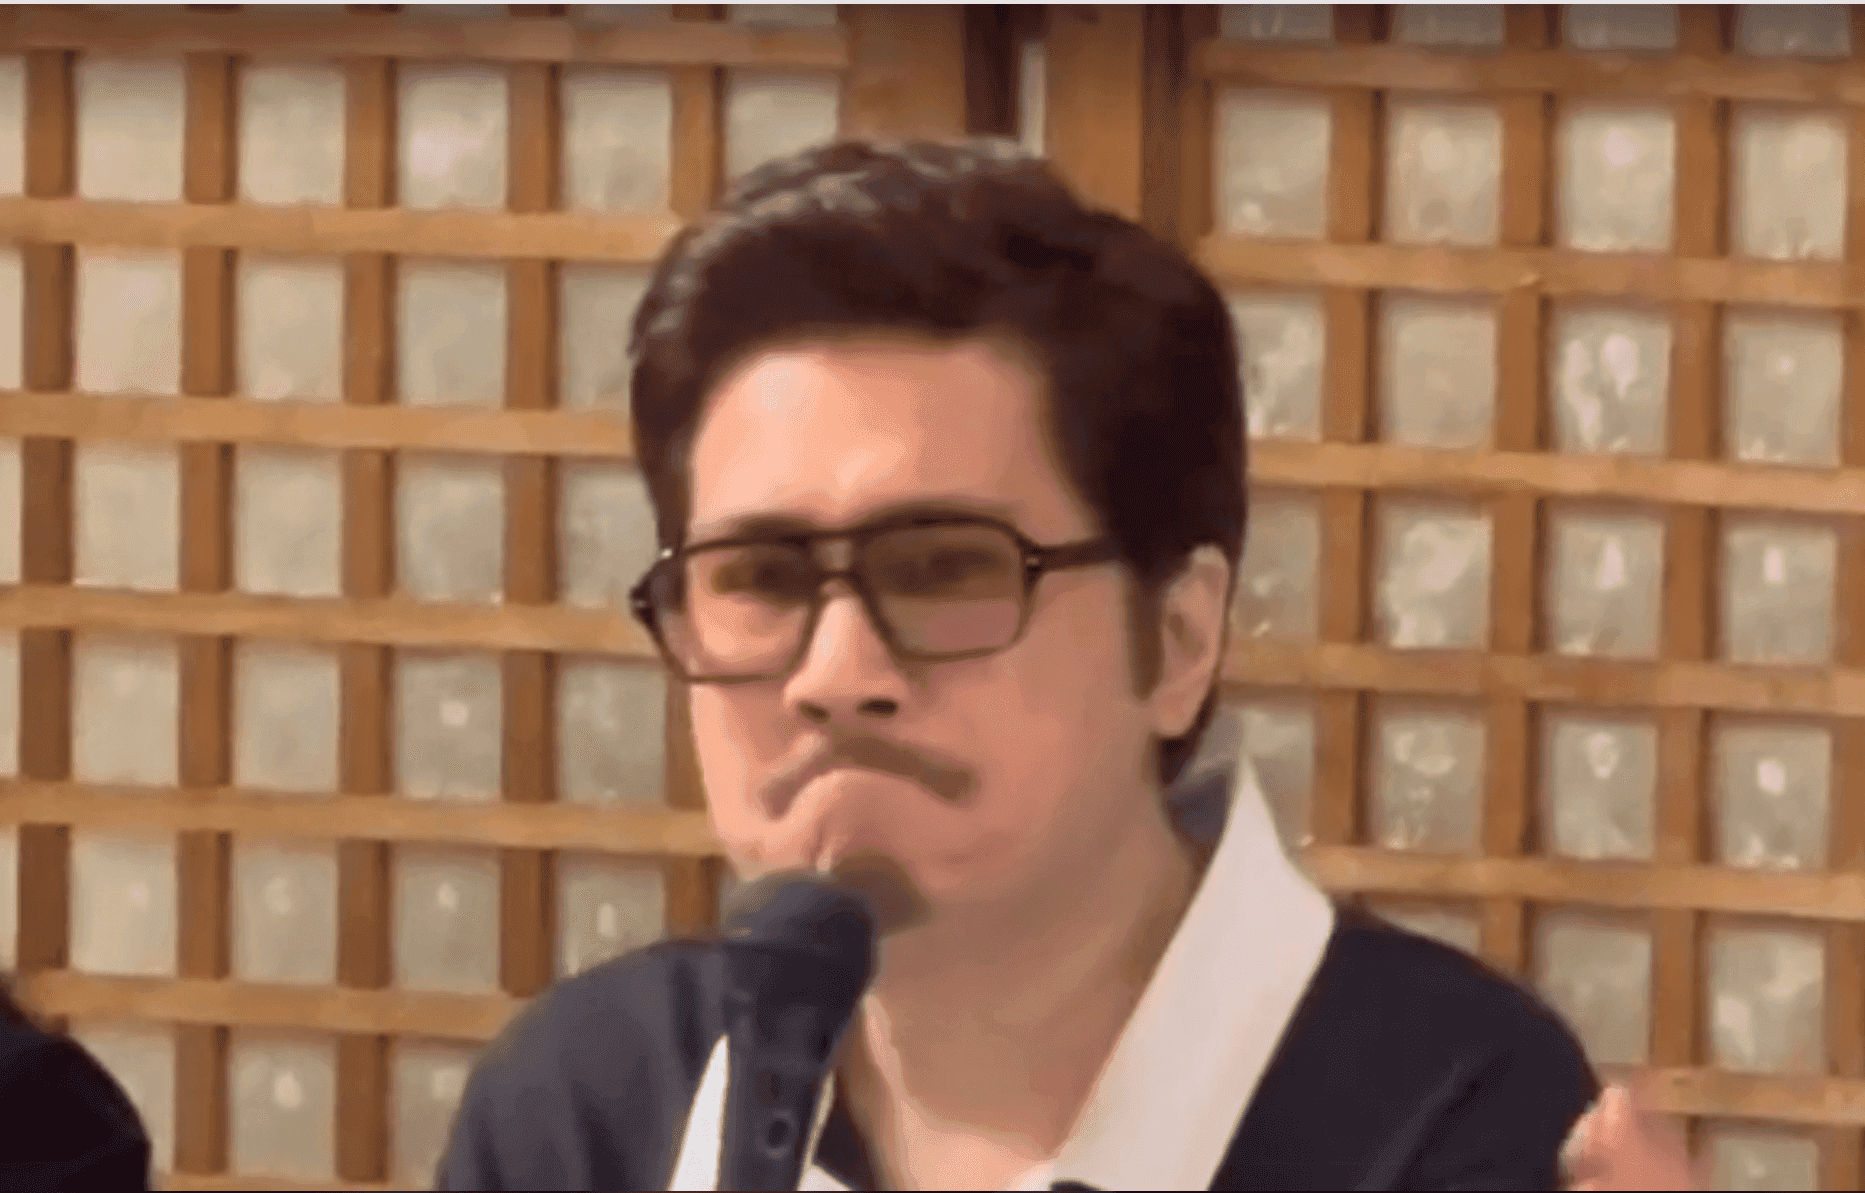 "Shame on you" Janno Gibs expresses anger to netizens who share his father's crime scene video